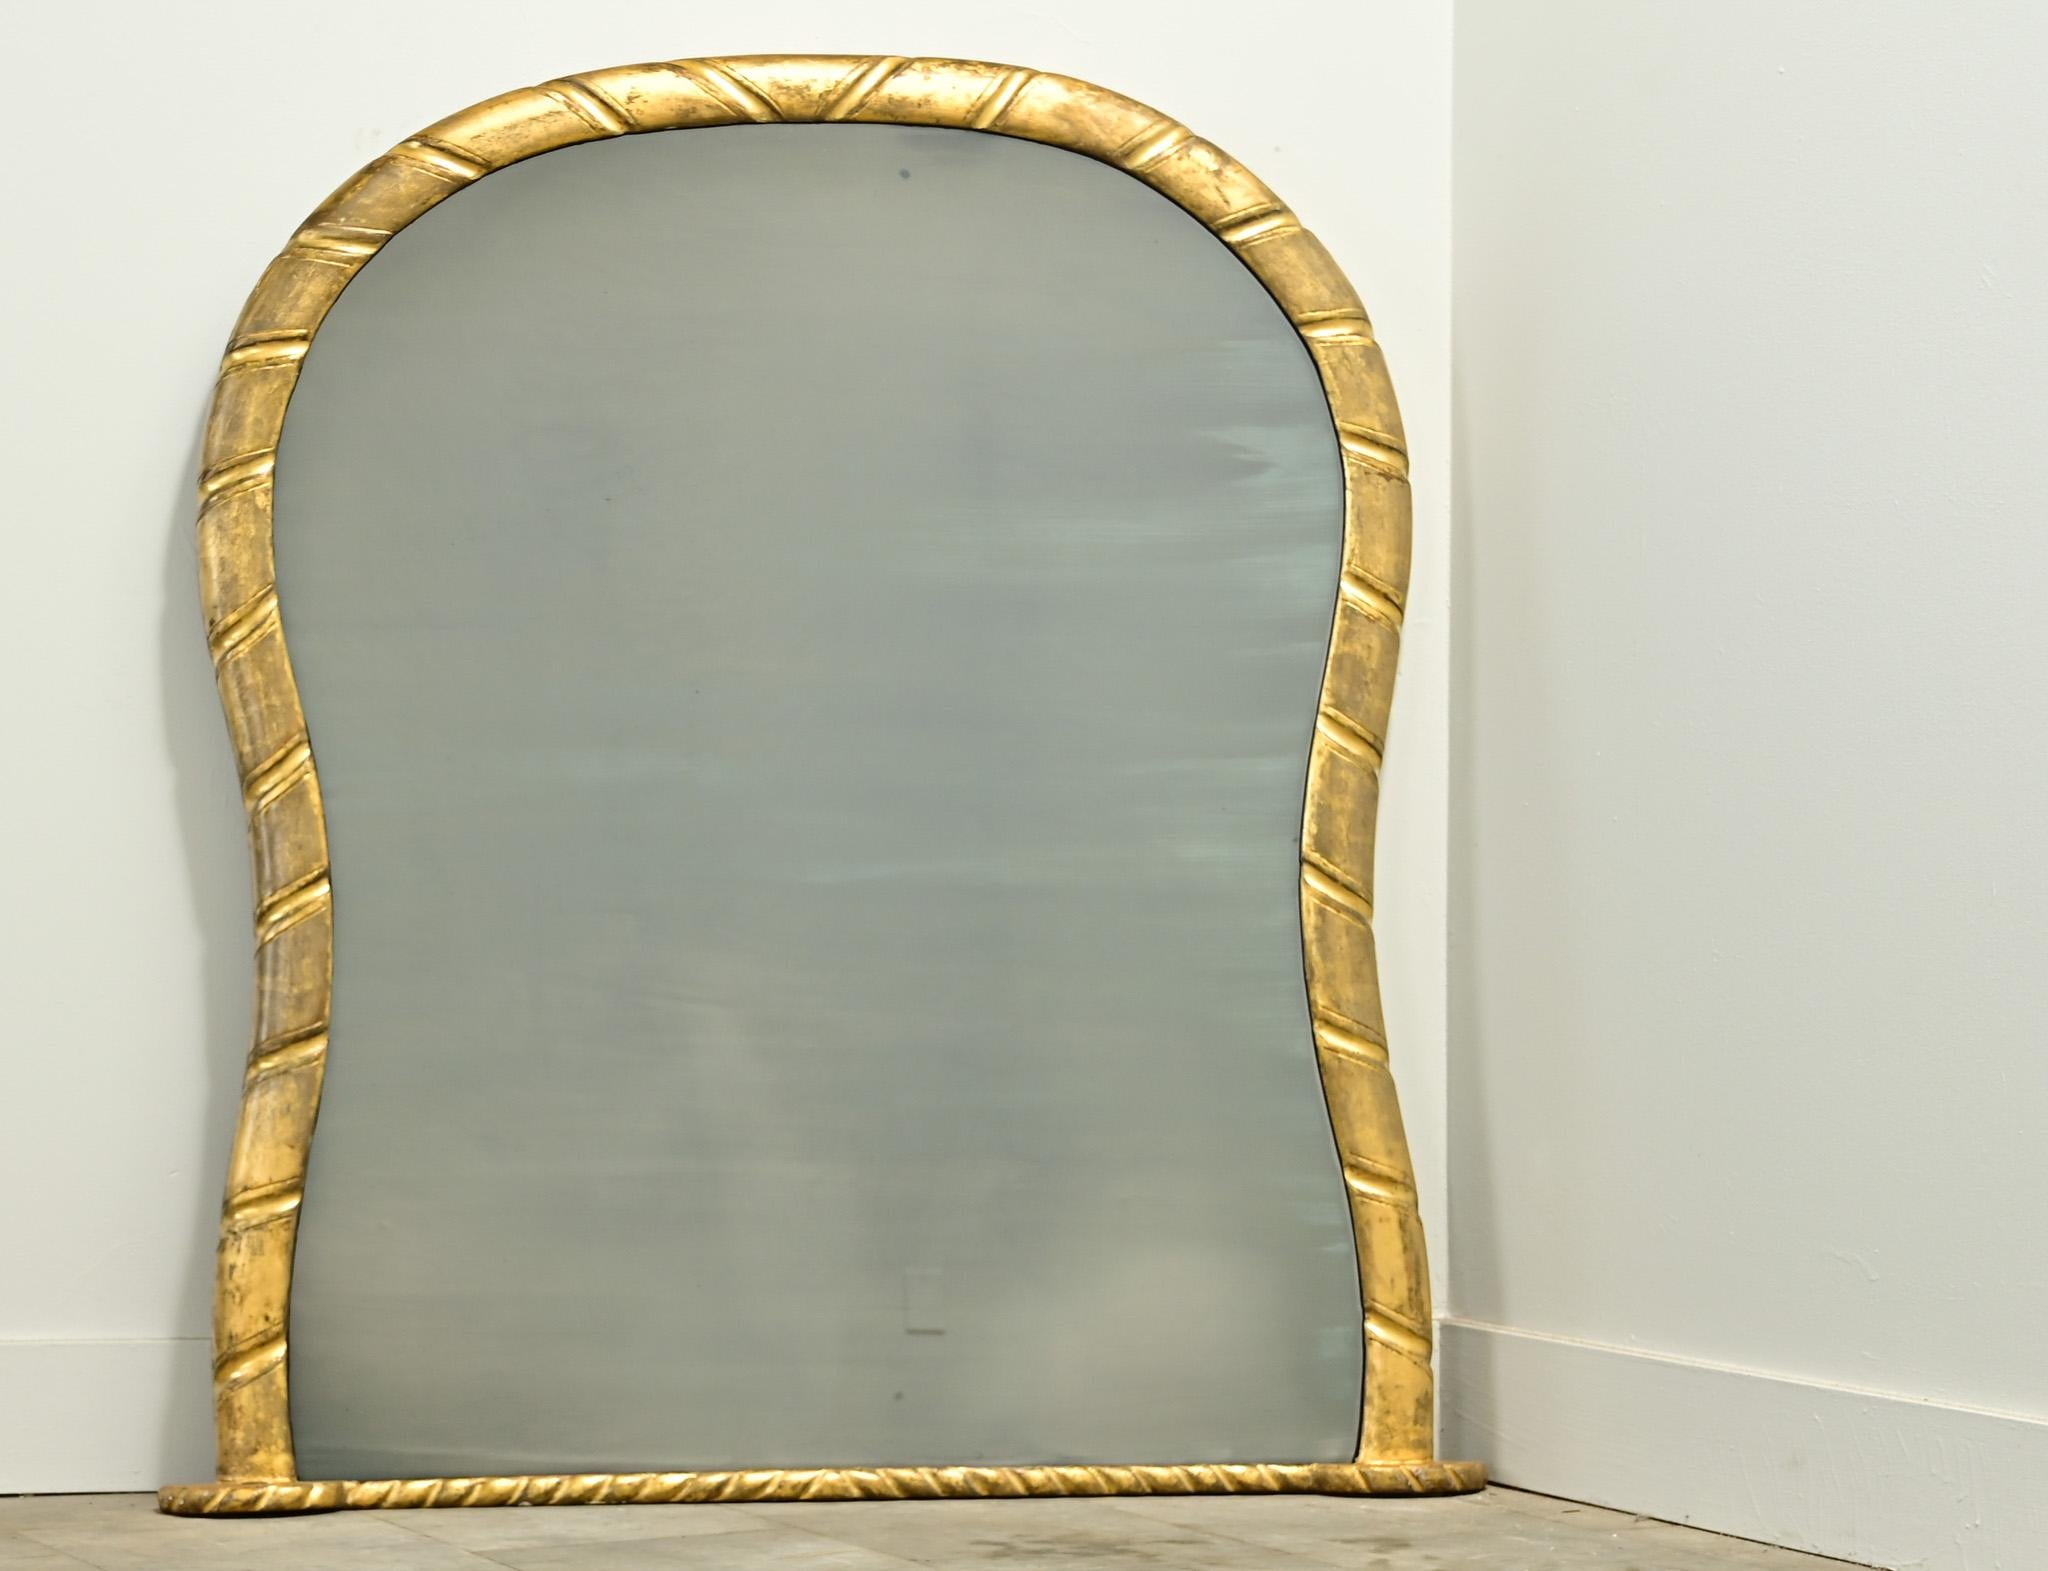 A carved French gold gilt mantle mirror from the 1800’s. The original mirror plate is surrounded by a carved hourglass shaped gold gilt frame. Be sure to view the detailed images to see the current condition.